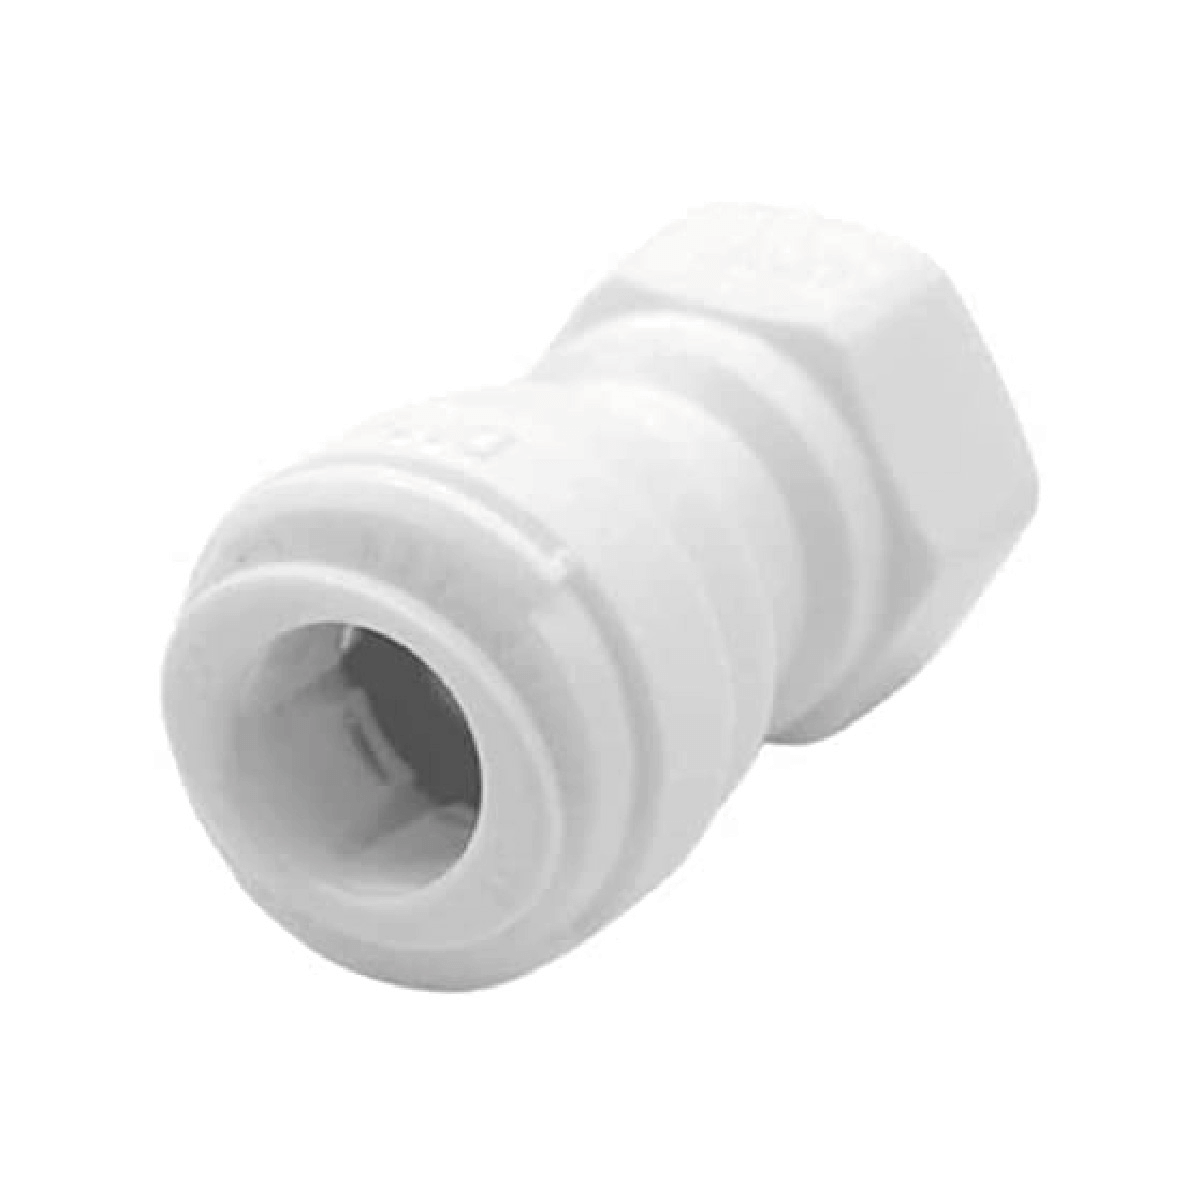 DMfit AFAUF Acetal Fitting Female Adapter Faucet Connector 1/4", 3/8"Tube OD, 7/16 - 20" UNF Thread V-Type (10 Pack)